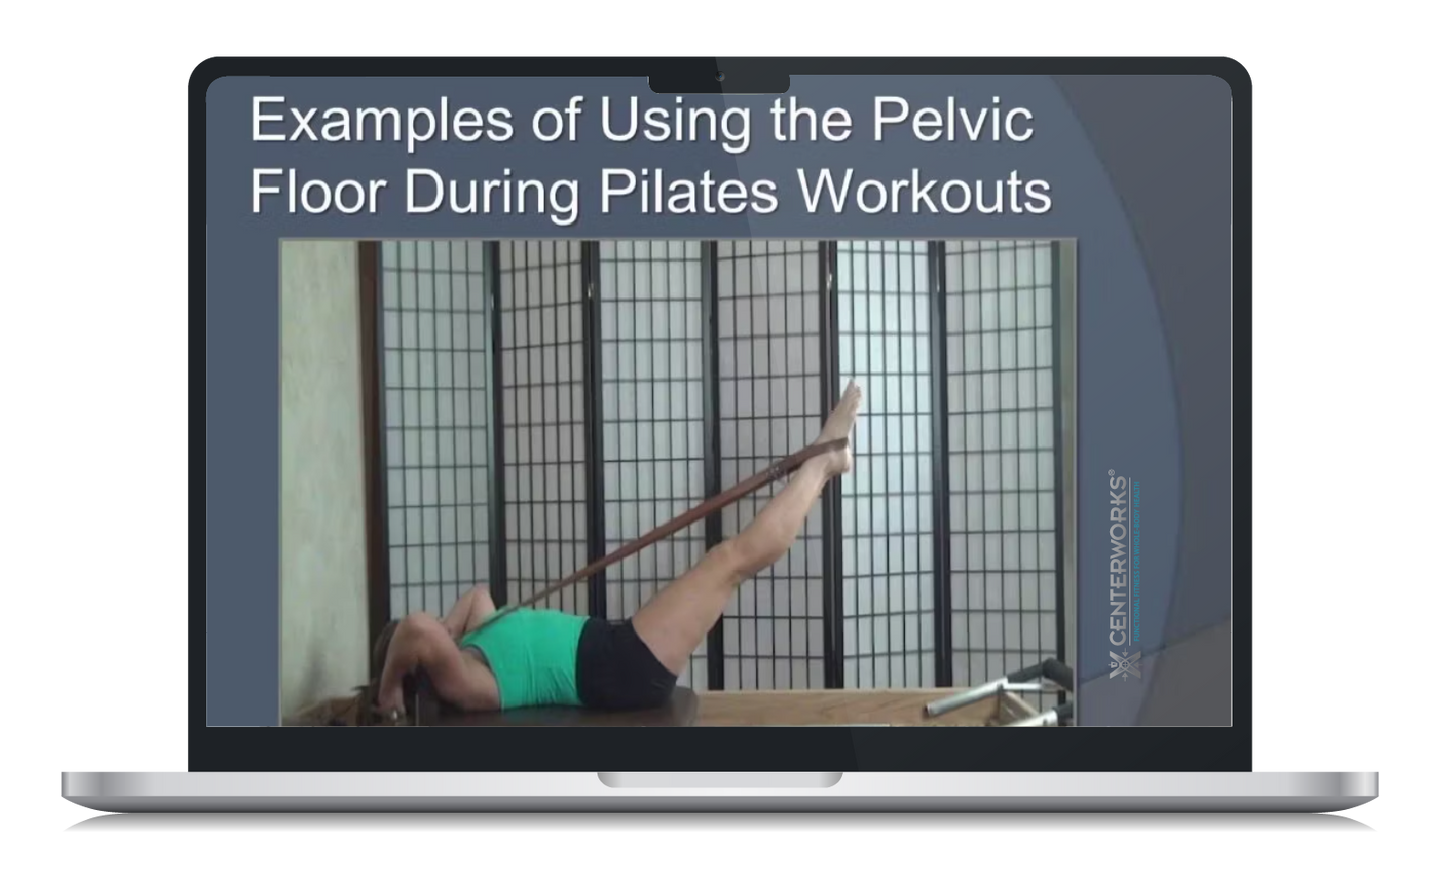 How to Effectively Engage the Pelvic Floor